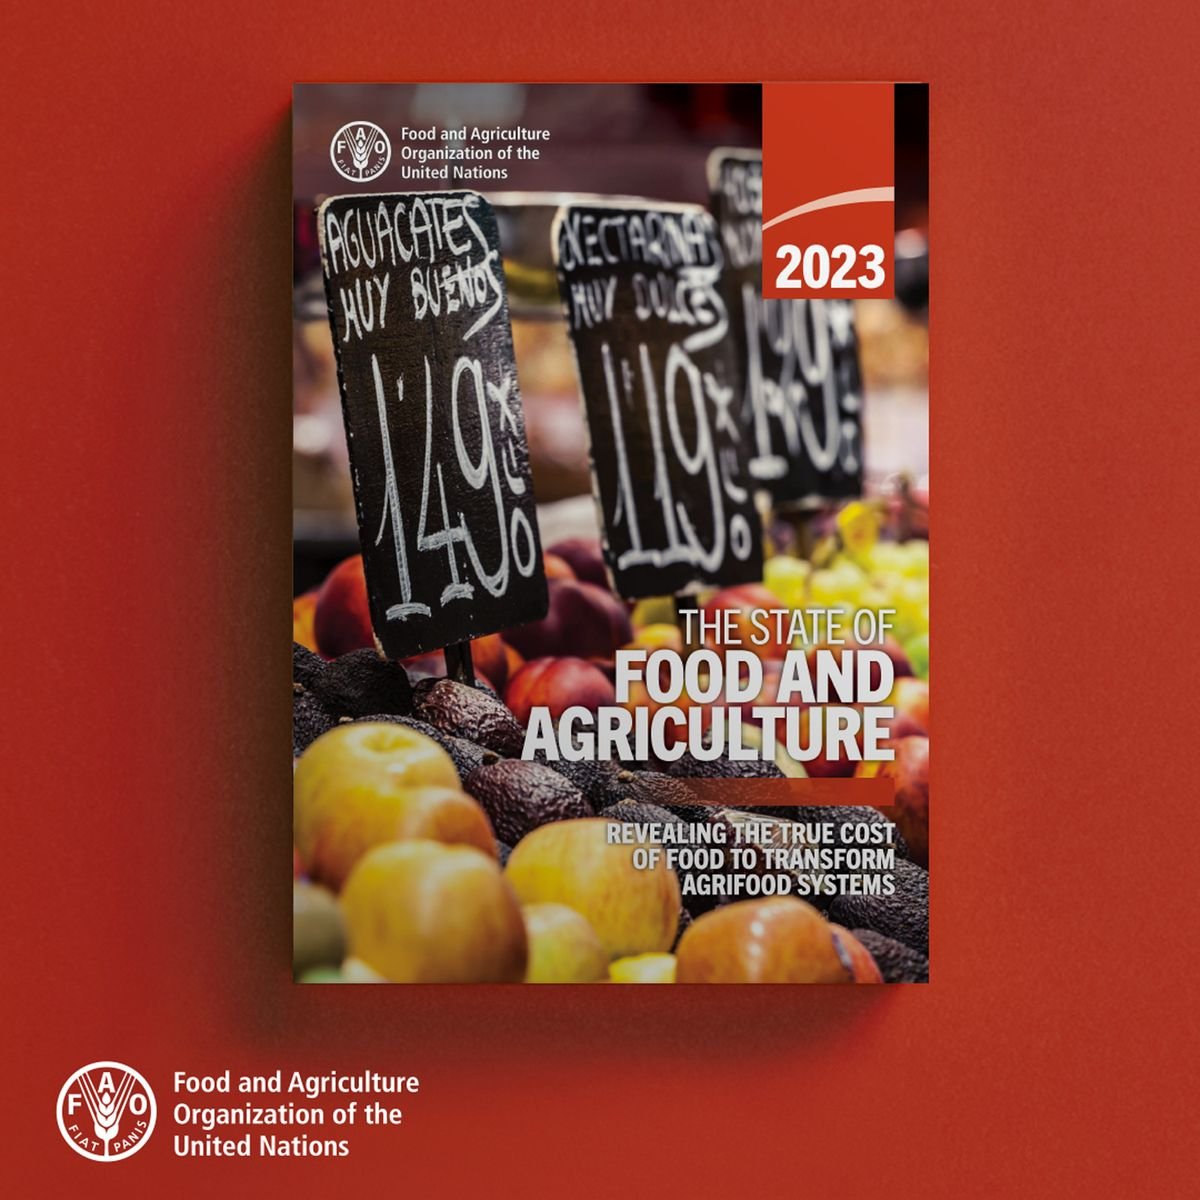 ⚡ A landmark moment for the #TrueCostAccounting community.

@FAO latest report #SOFA2023 reveals global agrifood systems have hidden costs of over $10tn - equal to nearly 10% of global GDP.

➡️ fao.org/3/cc7724en/onl…